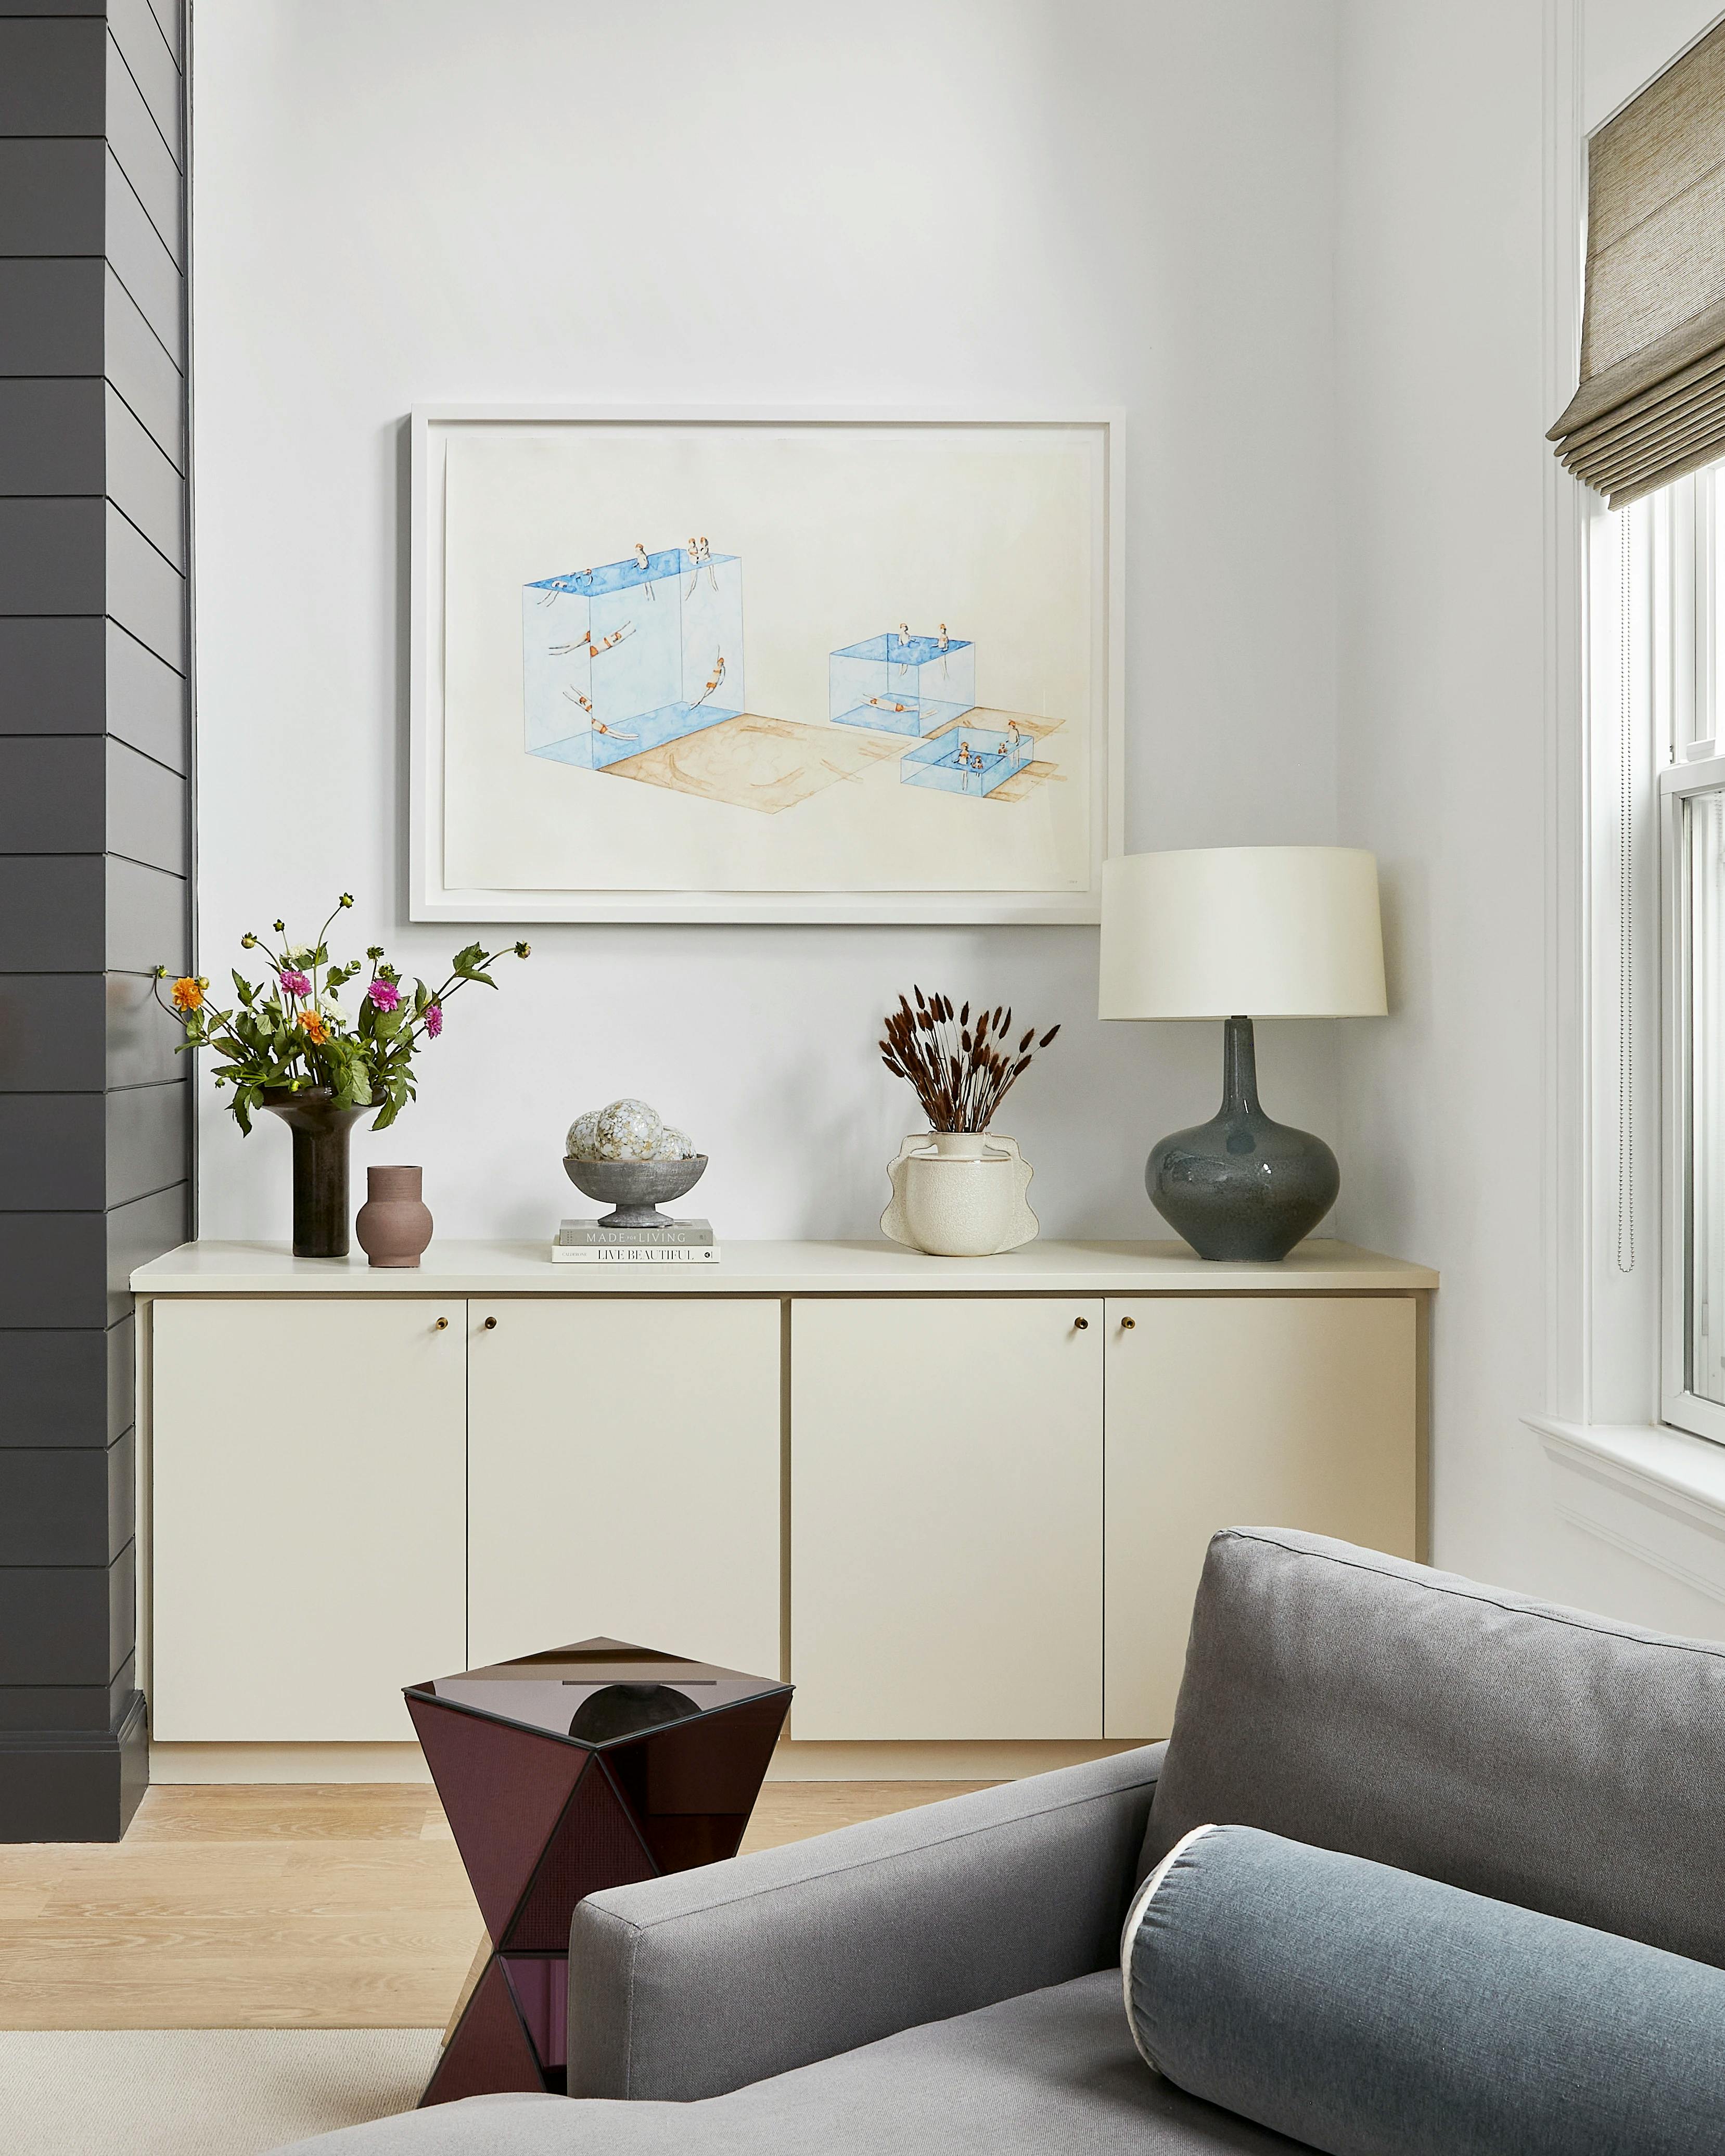 Framed painting on paper by Eddie K installed above a white credenza in a space designed by Alive + Kicking Design.